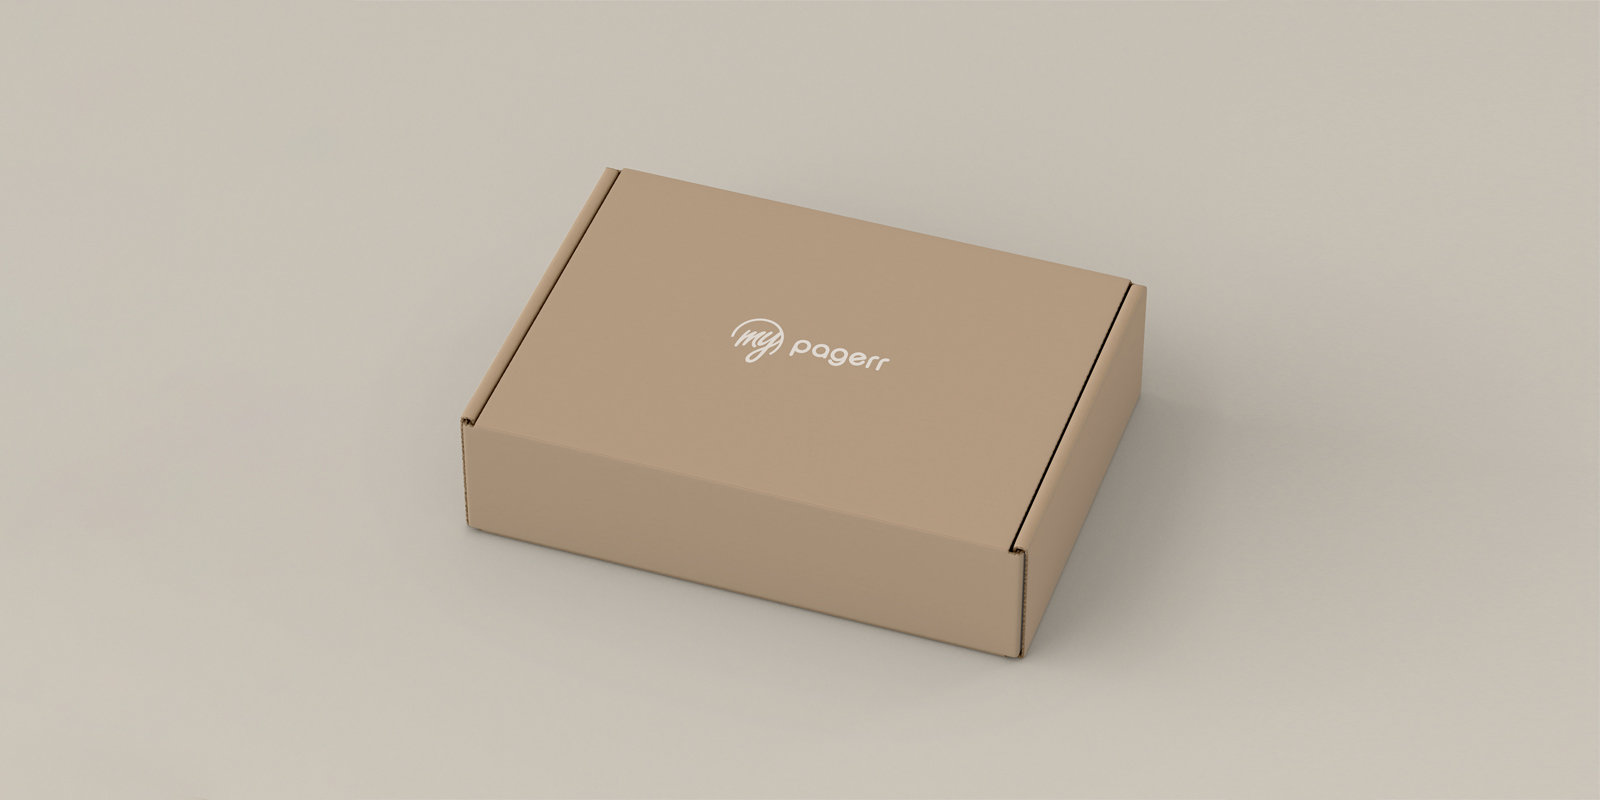 Bespoke boxes in Launceston - Print with Pagerr